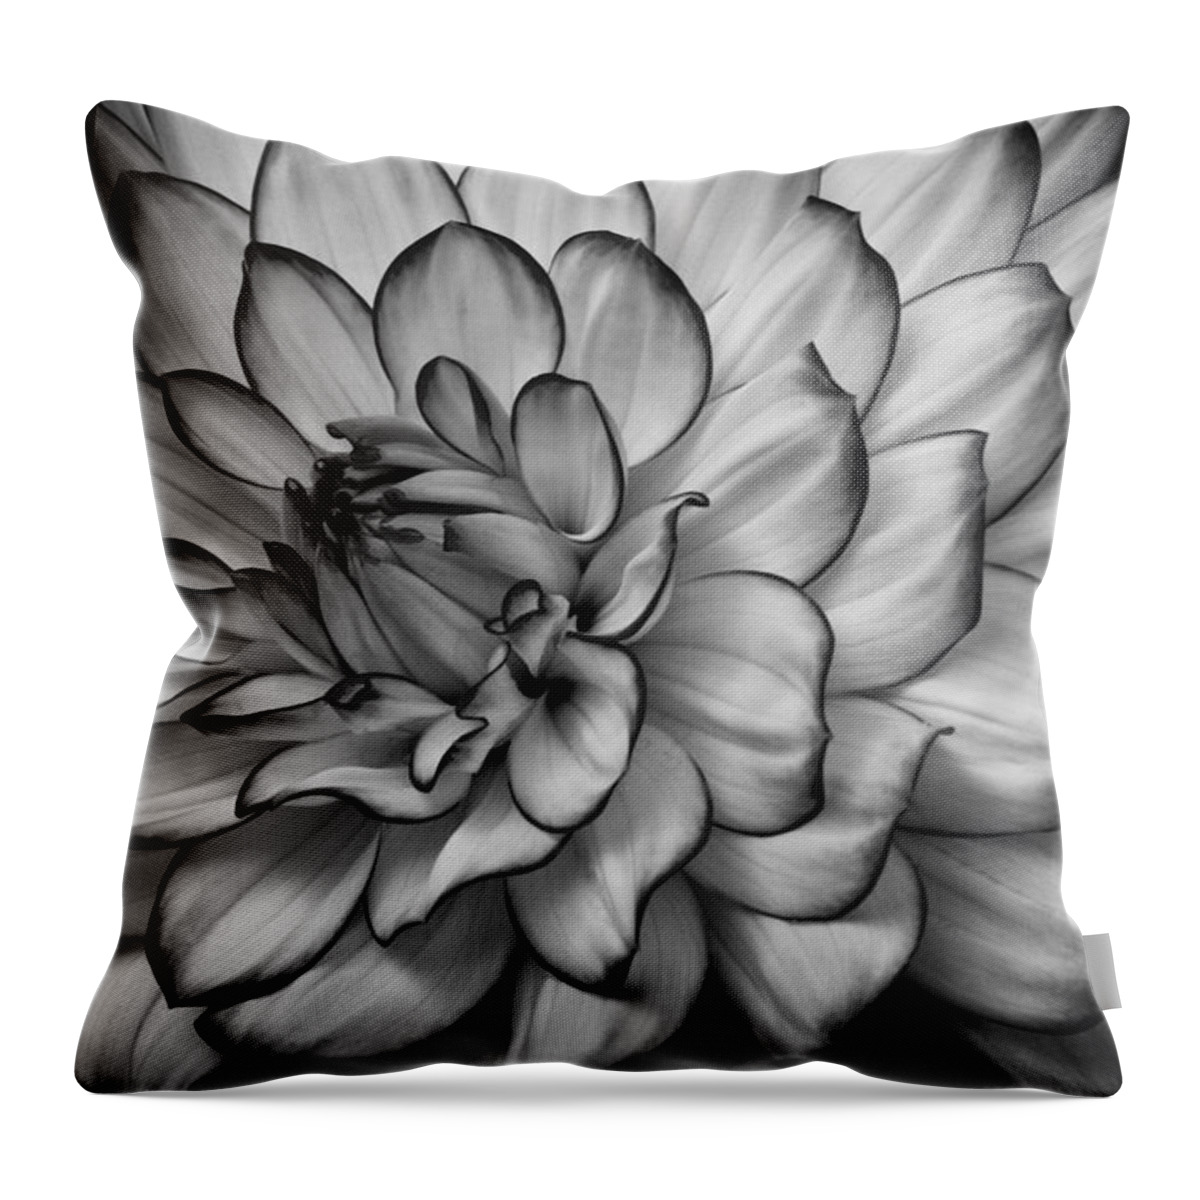 Dahlia Throw Pillow featuring the photograph Petals by Carrie Cranwill